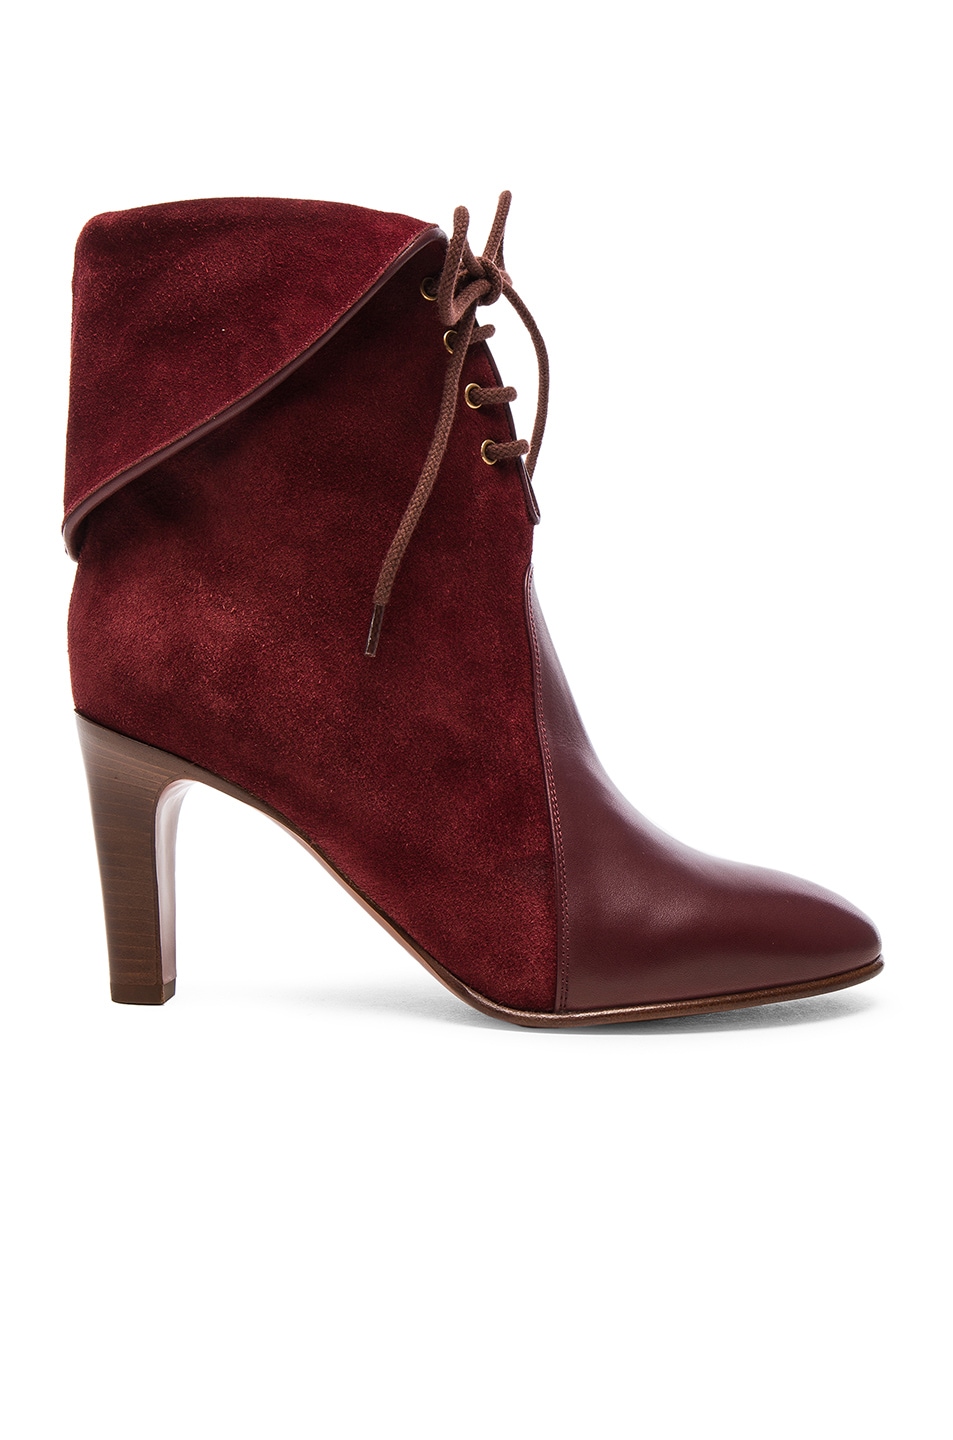 Image 1 of Chloe Suede Kole Ankle Boots in Red Vervain